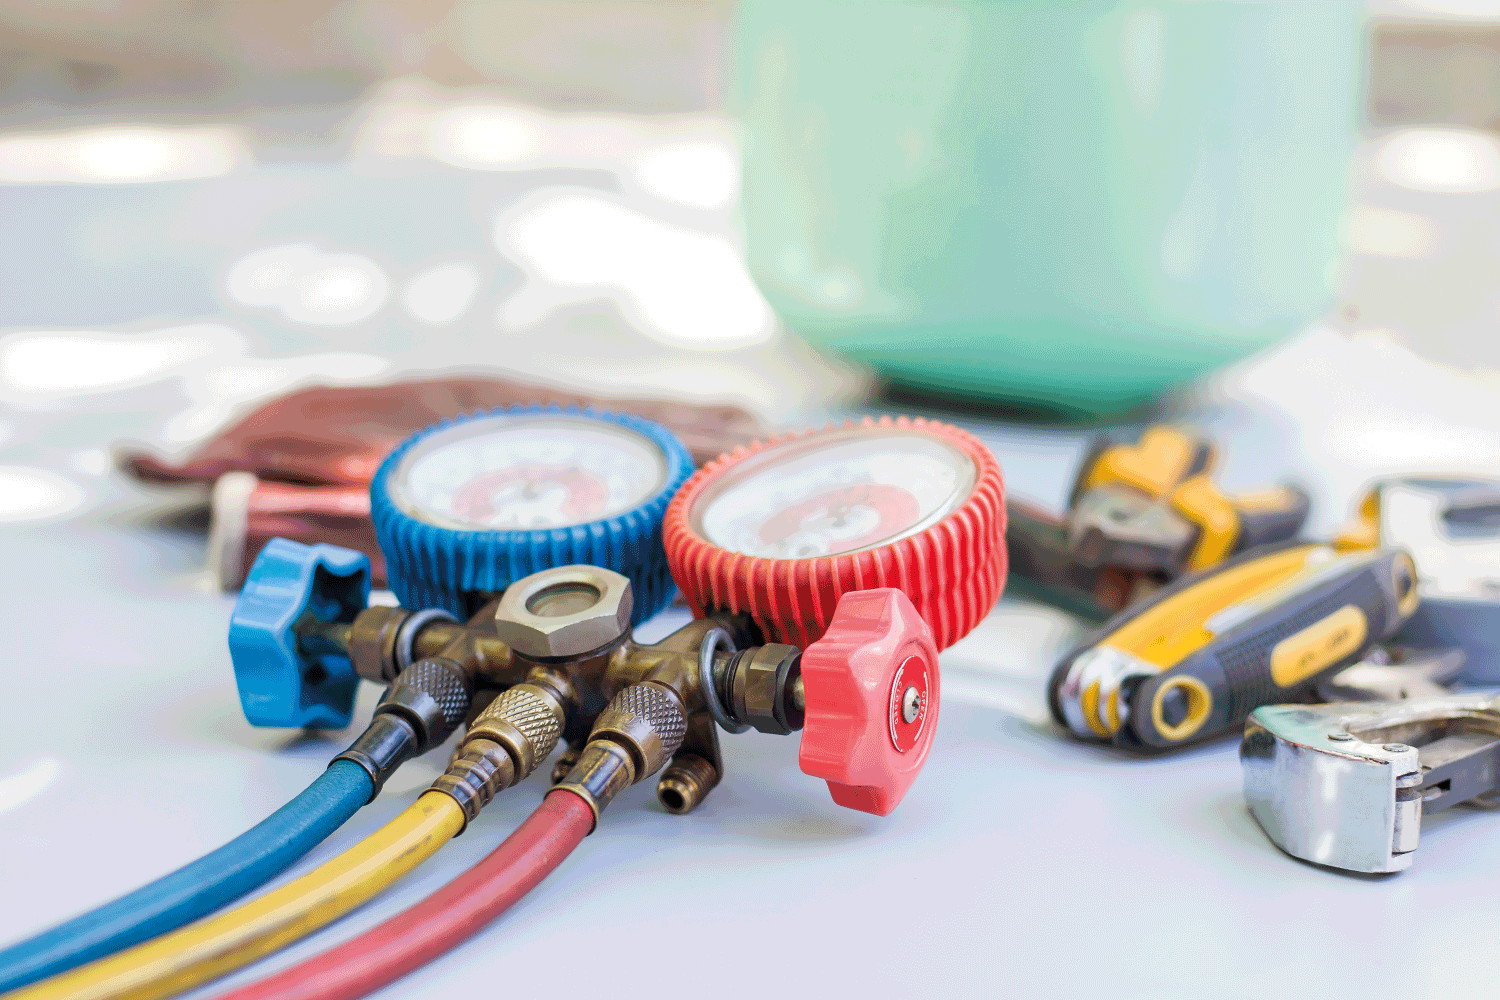 Tools for air conditioning repair and maintenance